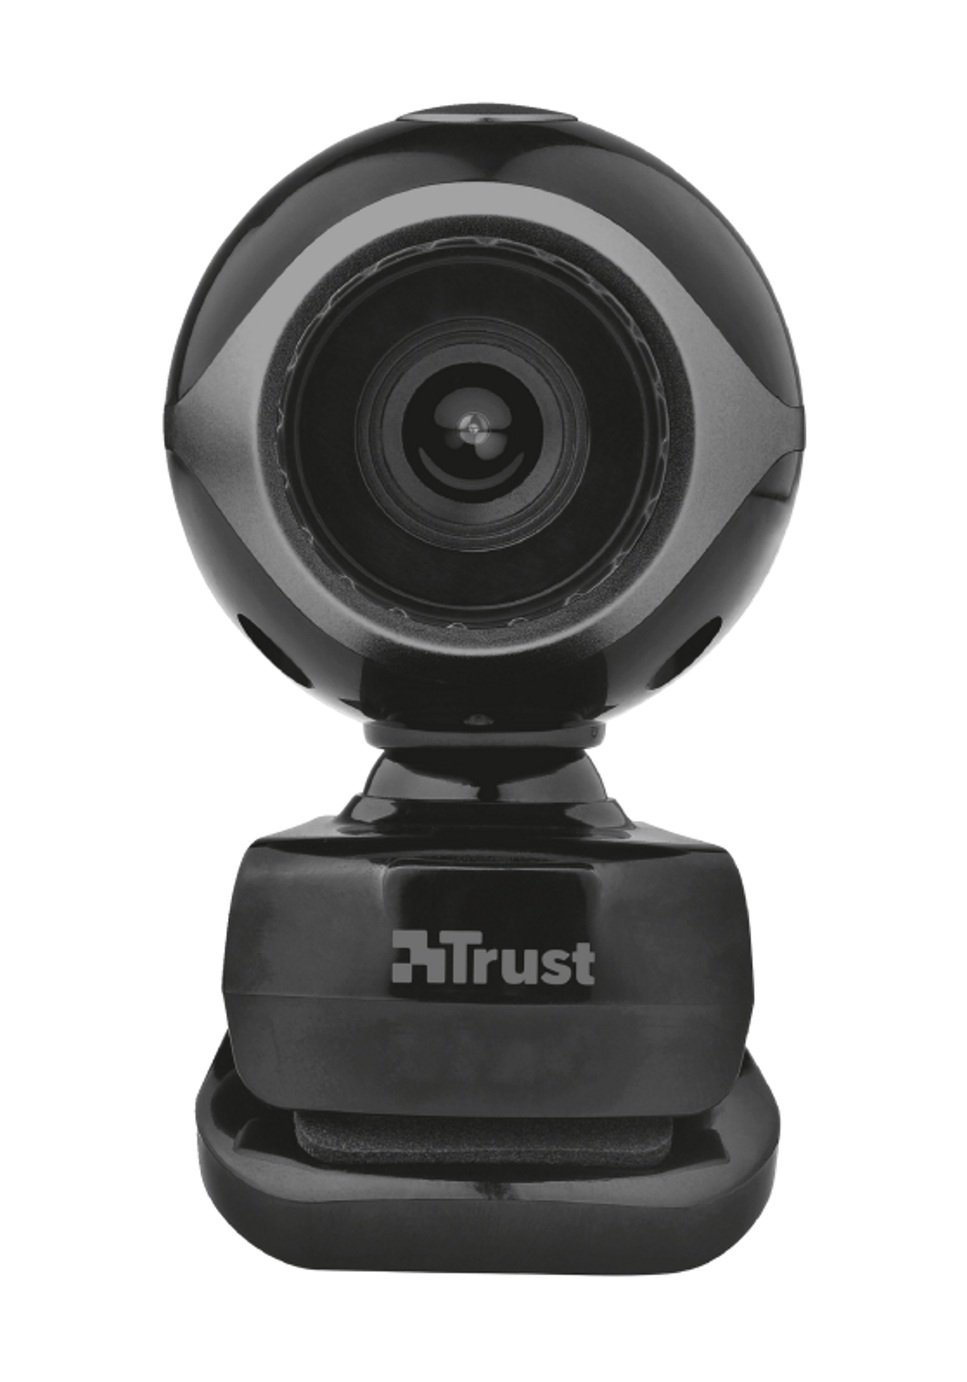 Trust Exis 17003 Webcam with Microphone Review